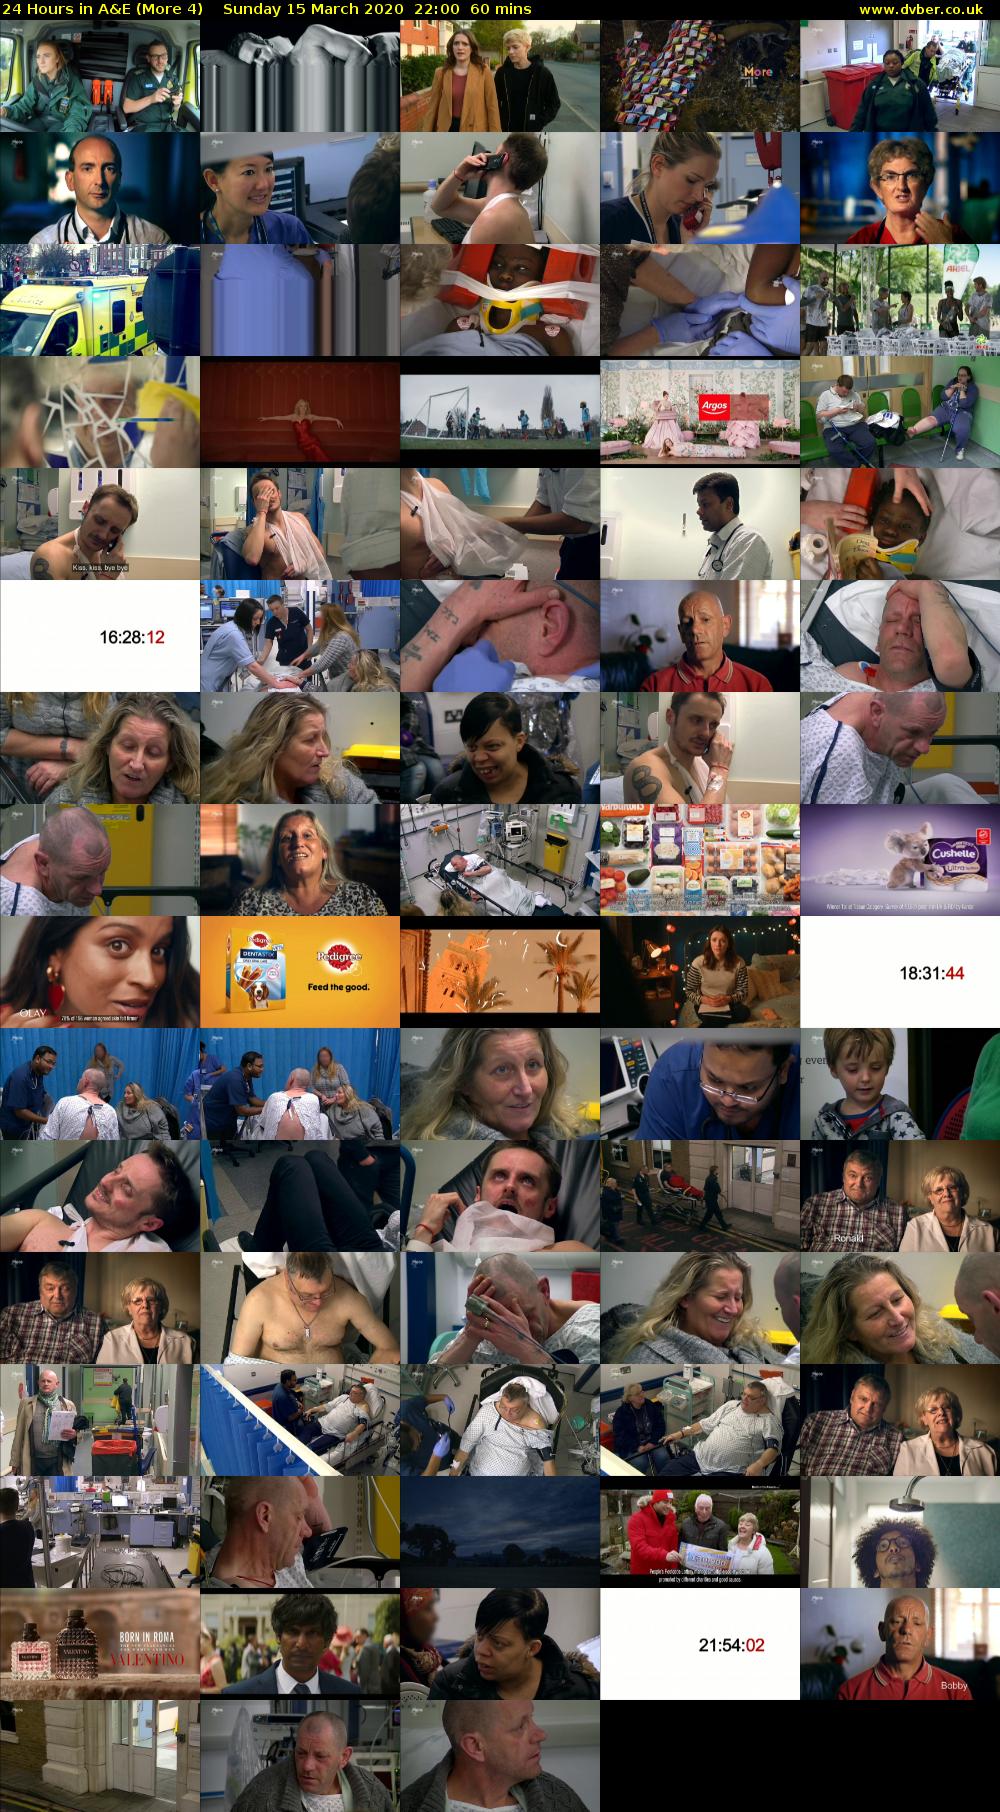 24 Hours in A&E (More 4) Sunday 15 March 2020 22:00 - 23:00